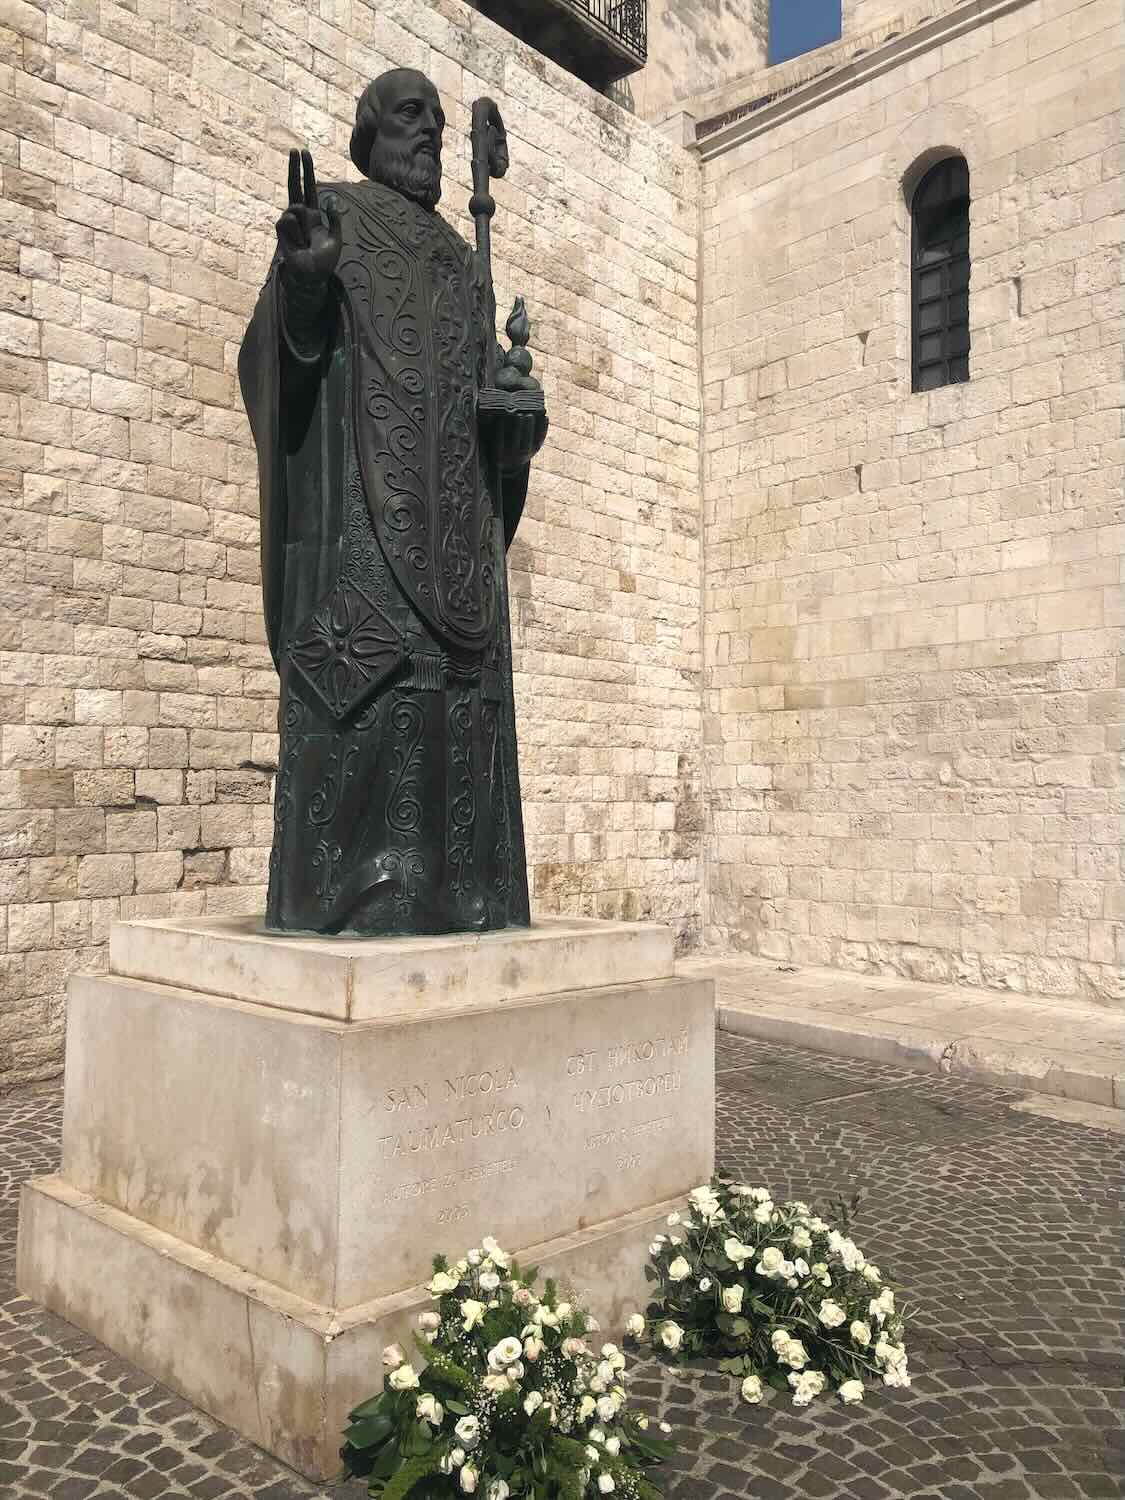 A statue of Saint Nicholas (San Nicola) in Bari, Italy, standing against a stone wall. The statue depicts the saint holding a staff and gesturing with his other hand. There are white flowers placed at the base of the statue.